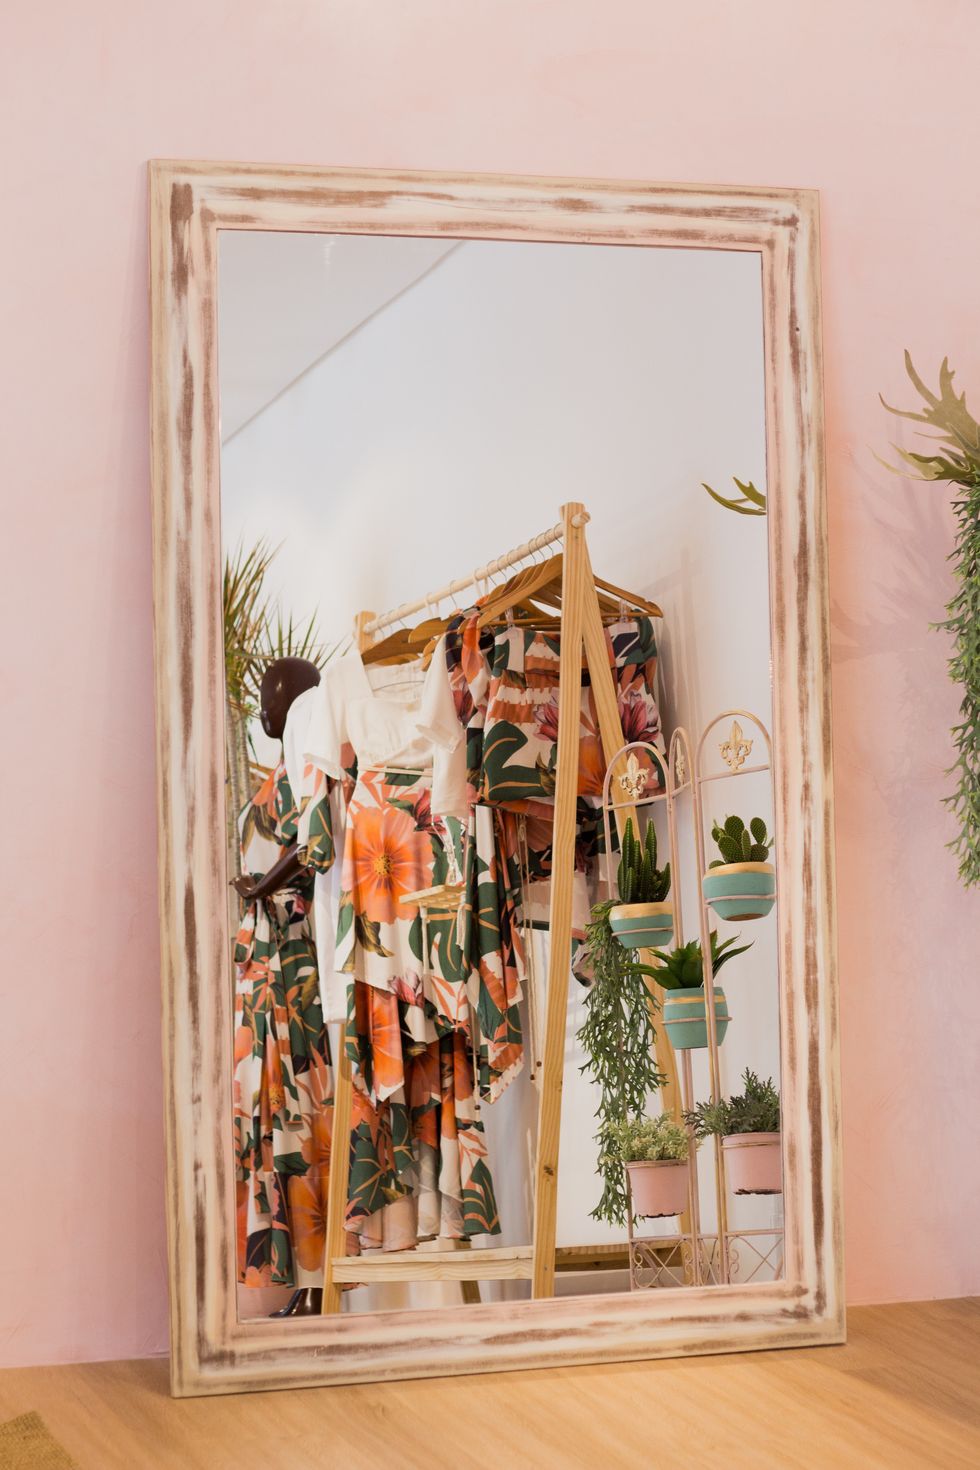 Mirror in pink room